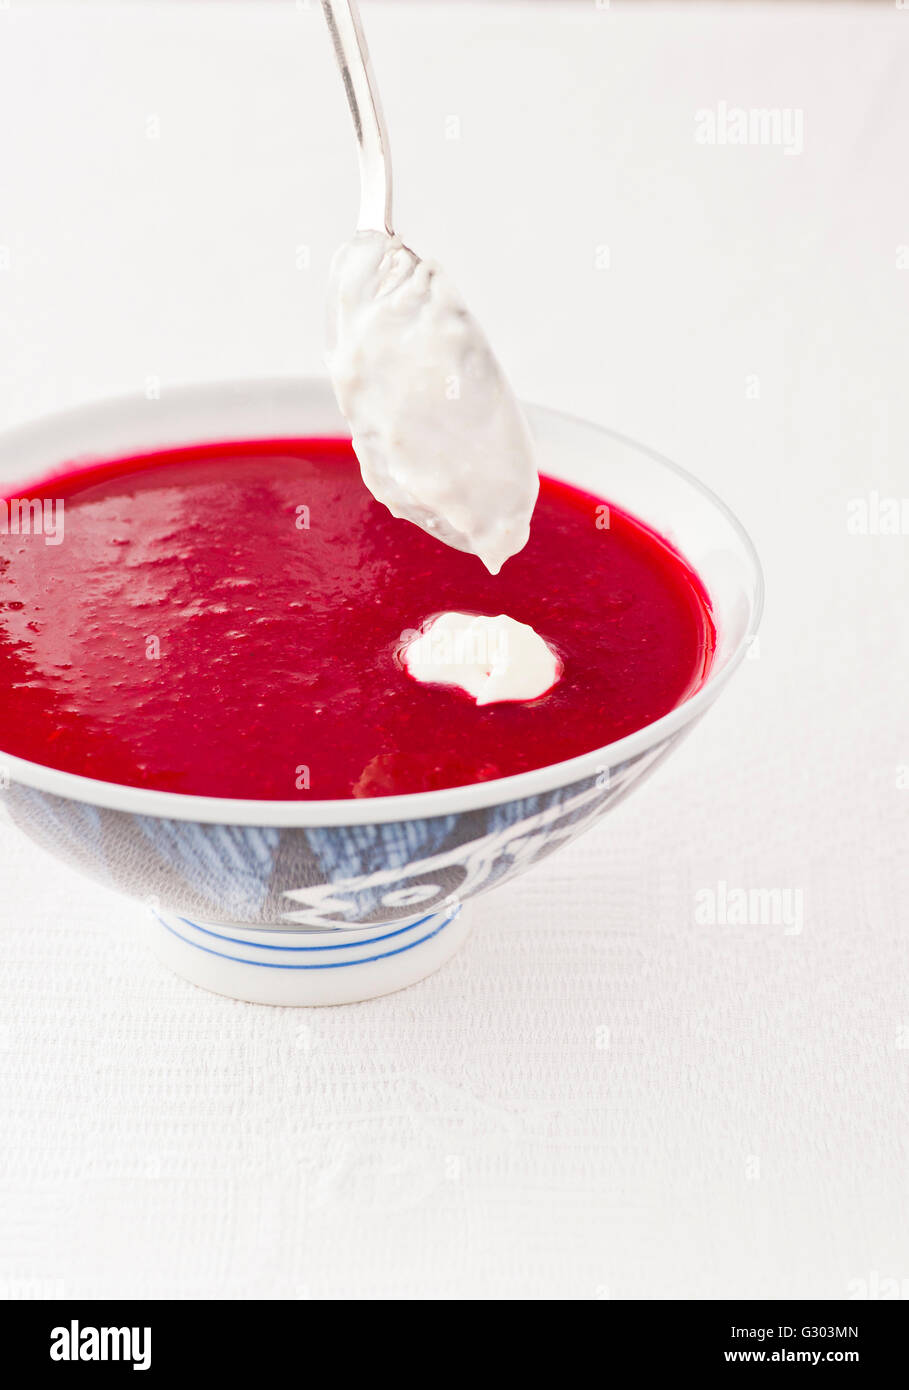 Borscht, traditional Russian beetroot soup, served chilled with sourcream topping Stock Photo